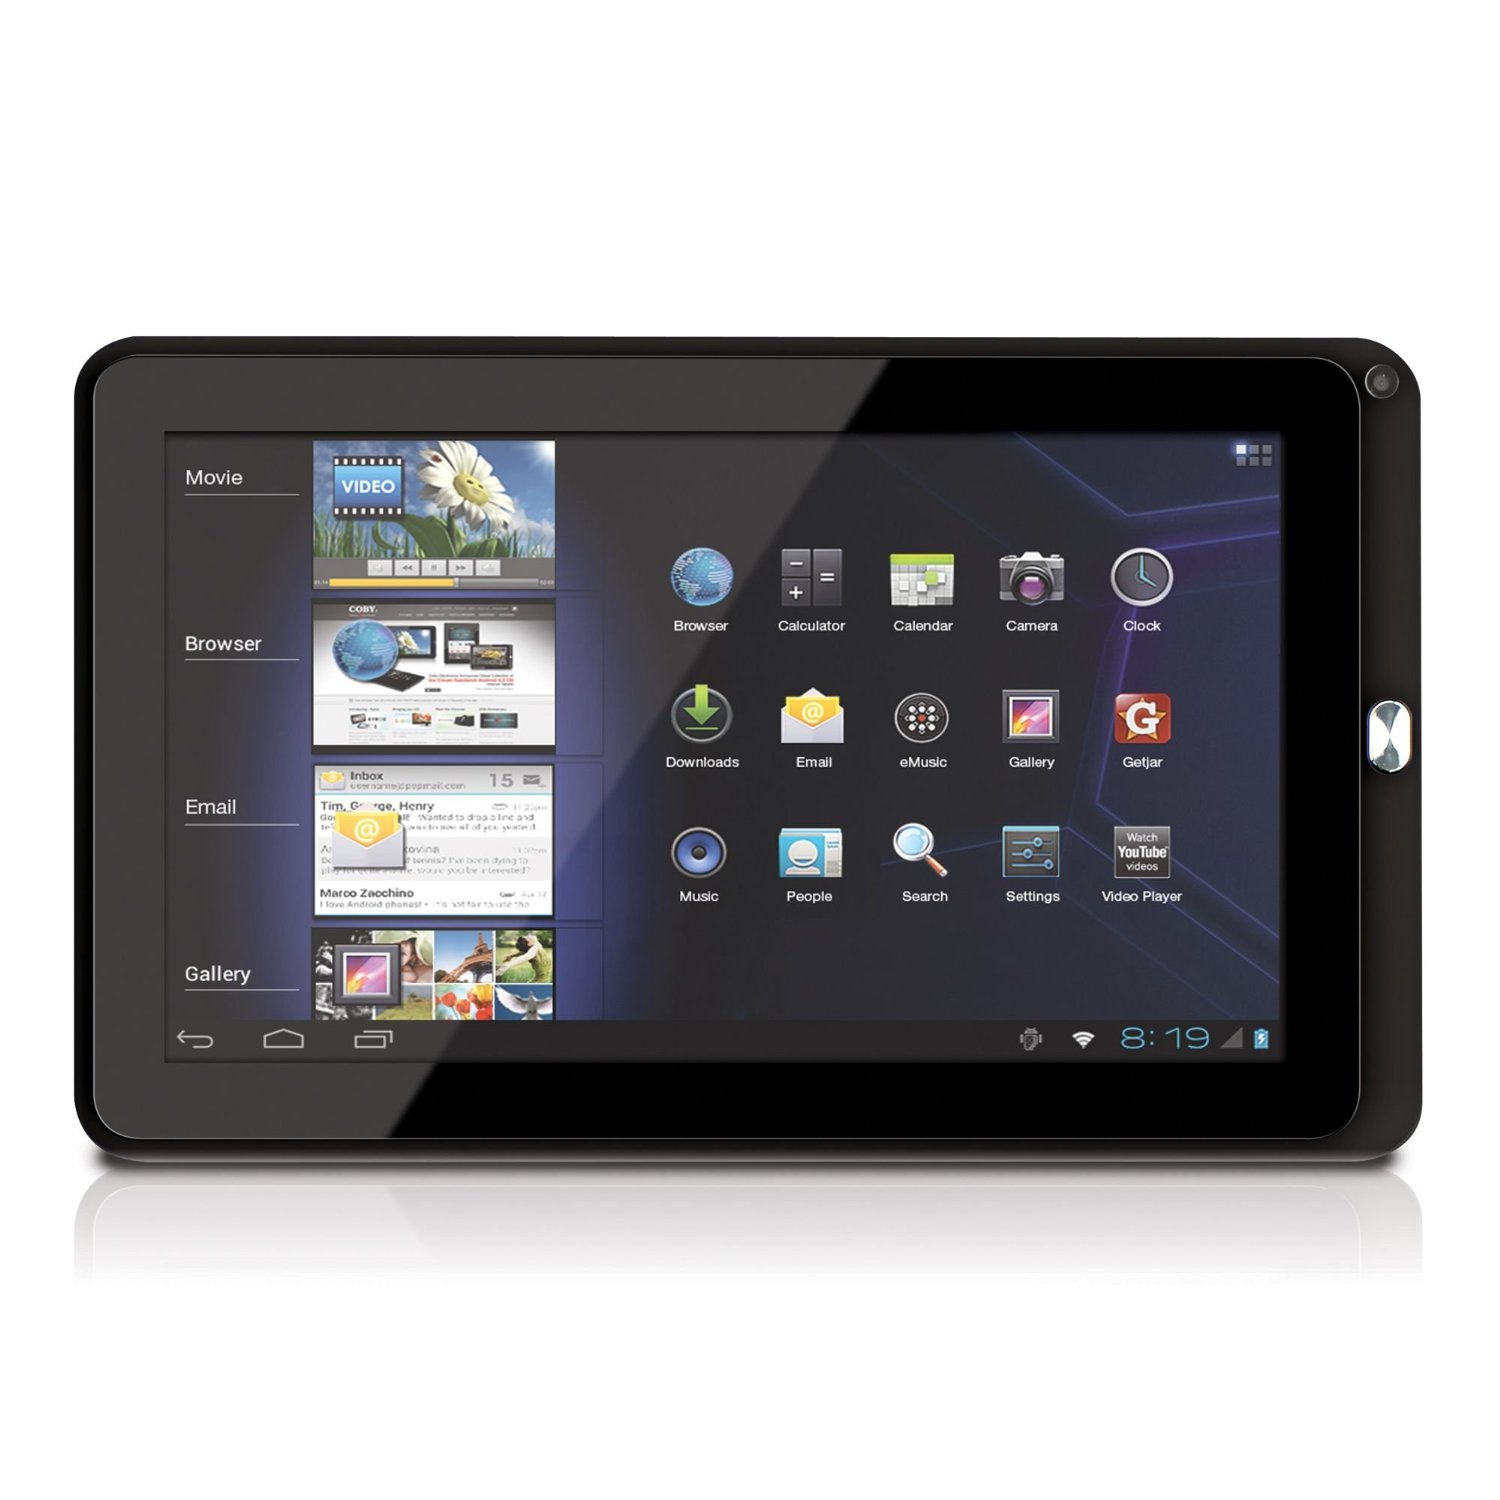 http://thetechjournal.com/wp-content/uploads/images/1206/1339867848-coby-kyros-101inch-android-powered-internet-tablet-6.jpg